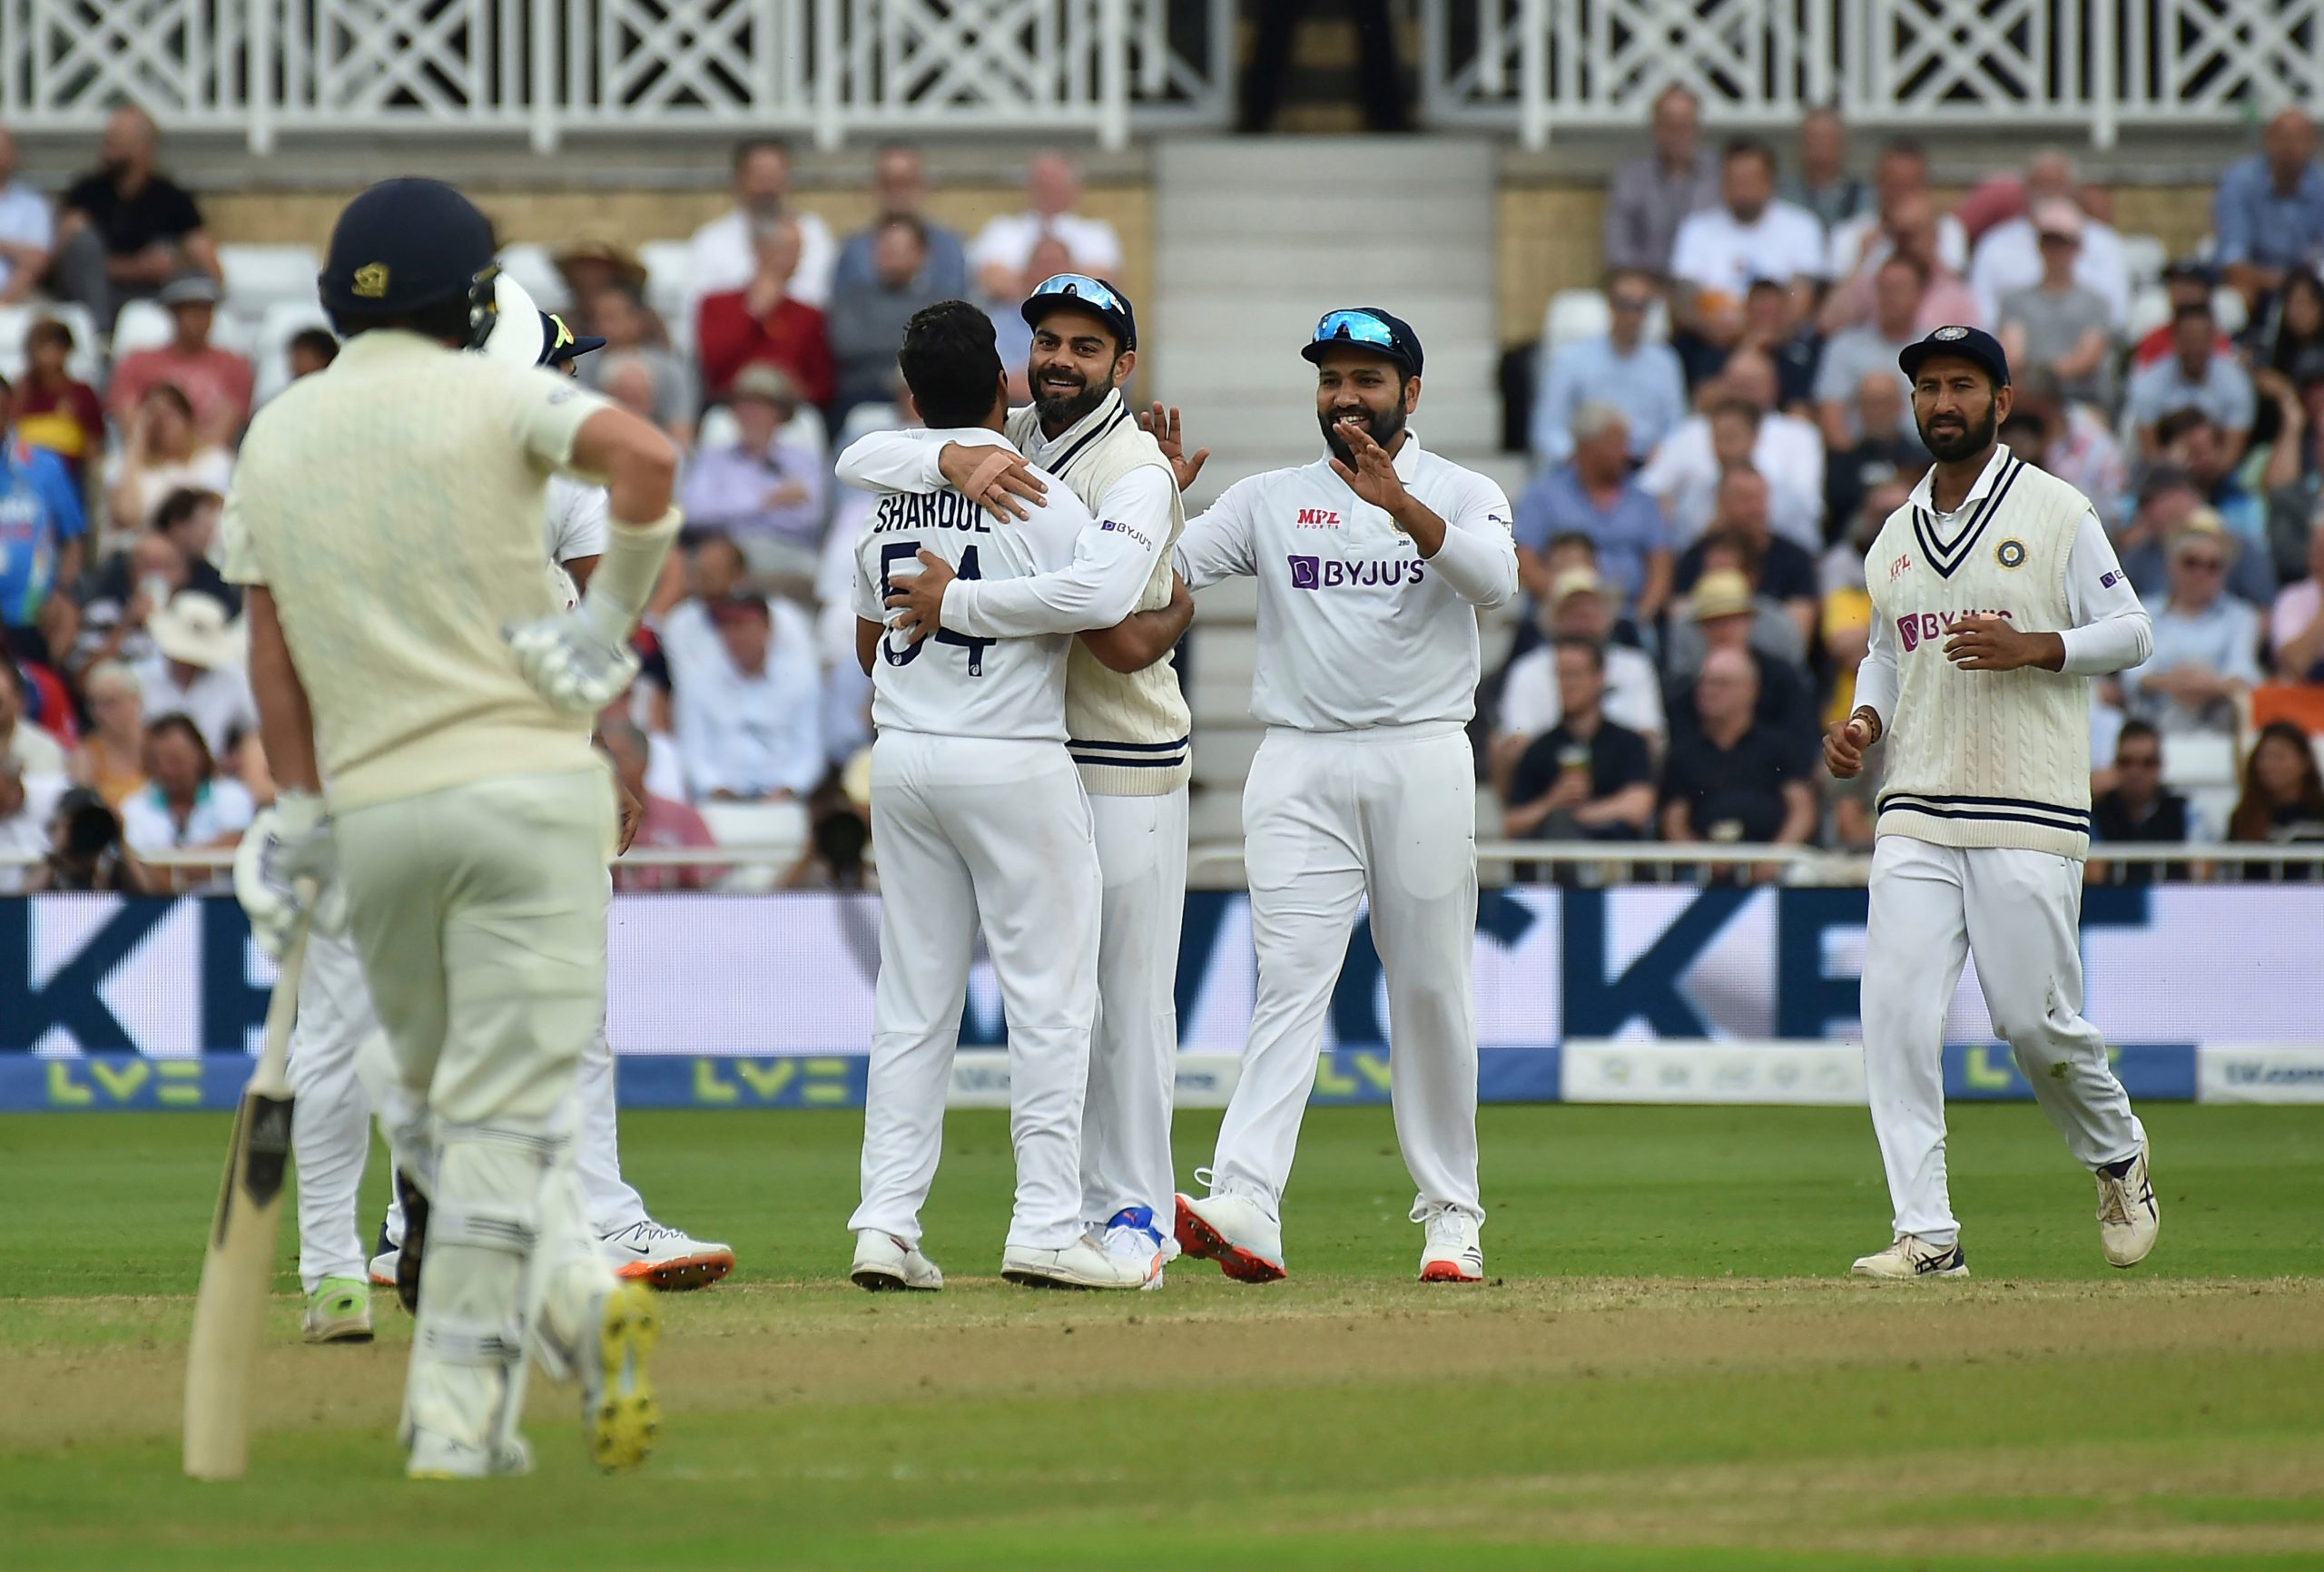 India’s bowling attack most potent, says England batting coach